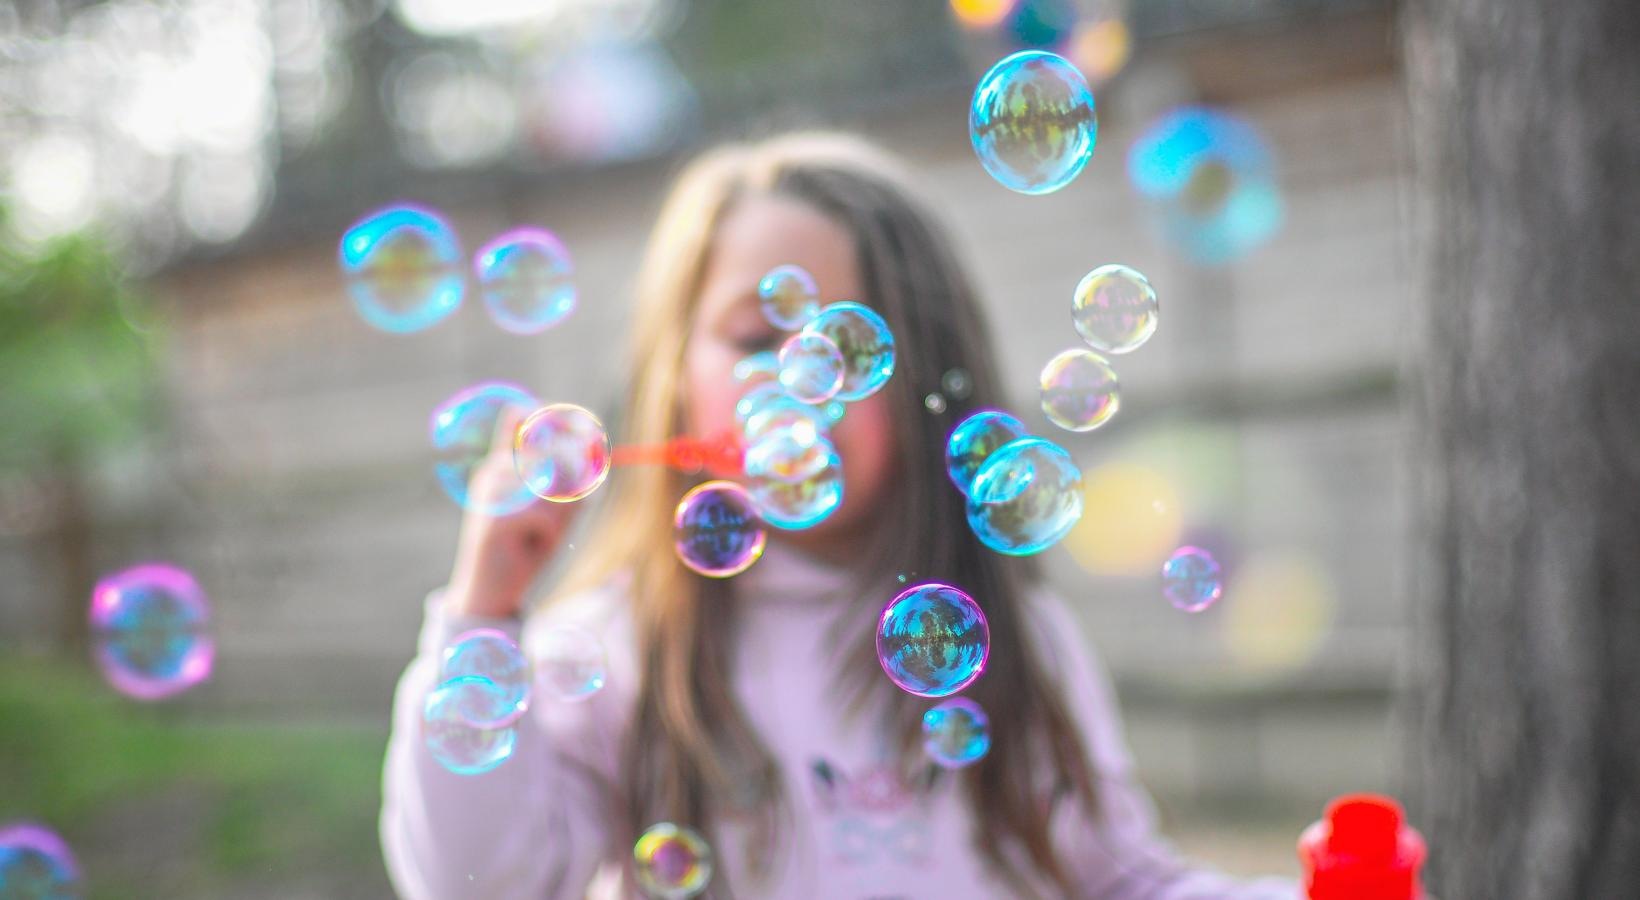 Young girl blowing bubbles with a bubble wand